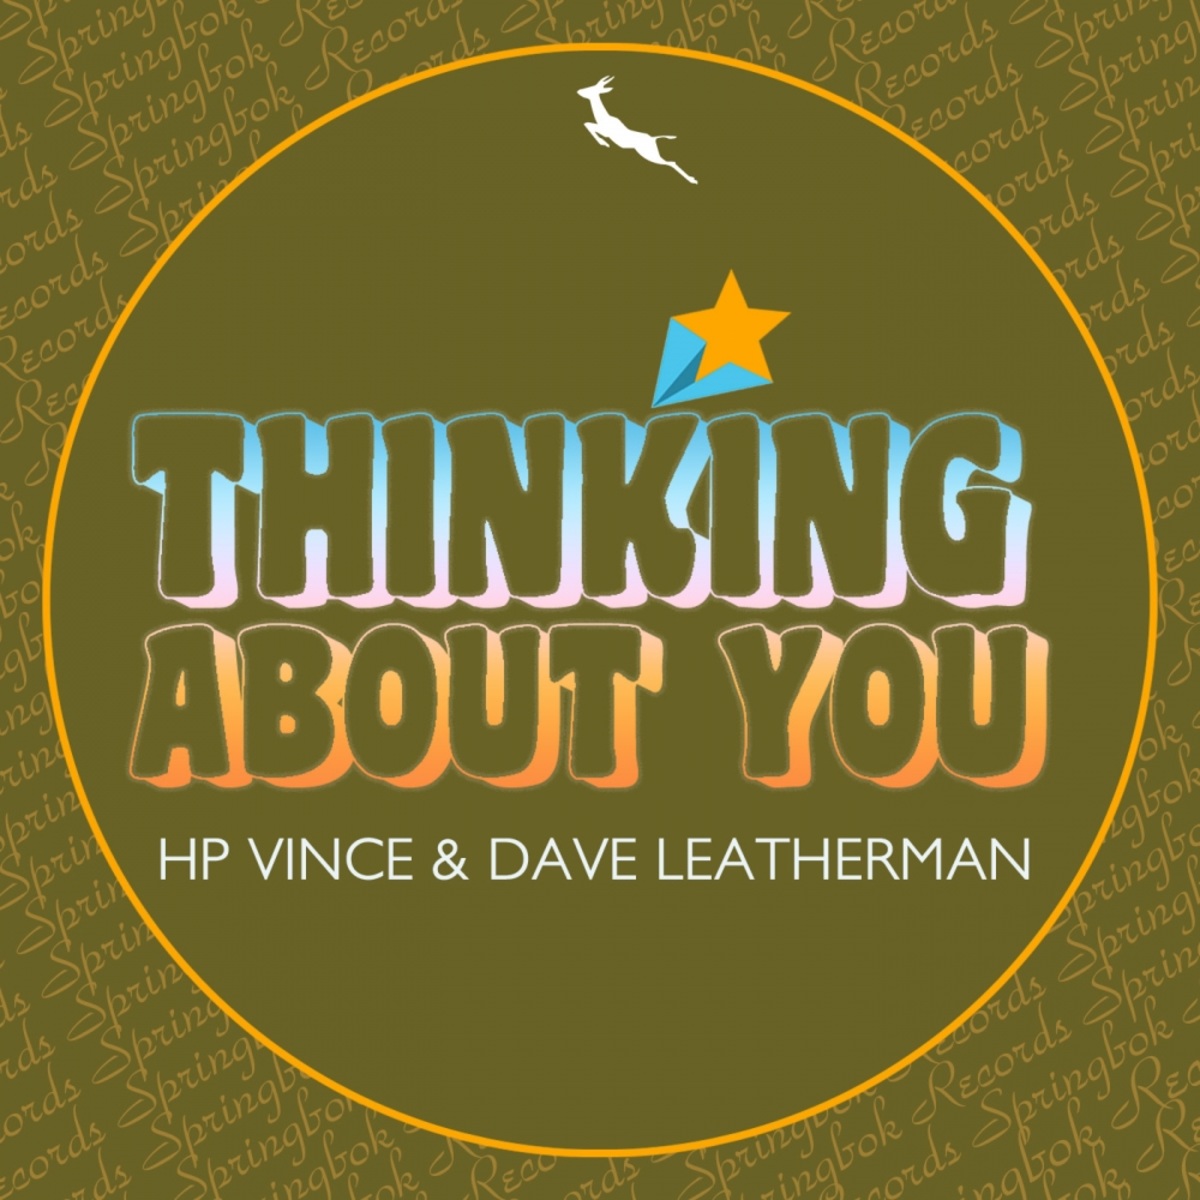 HP Vince & Dave Leatherman - Thinking About You / Springbok Records